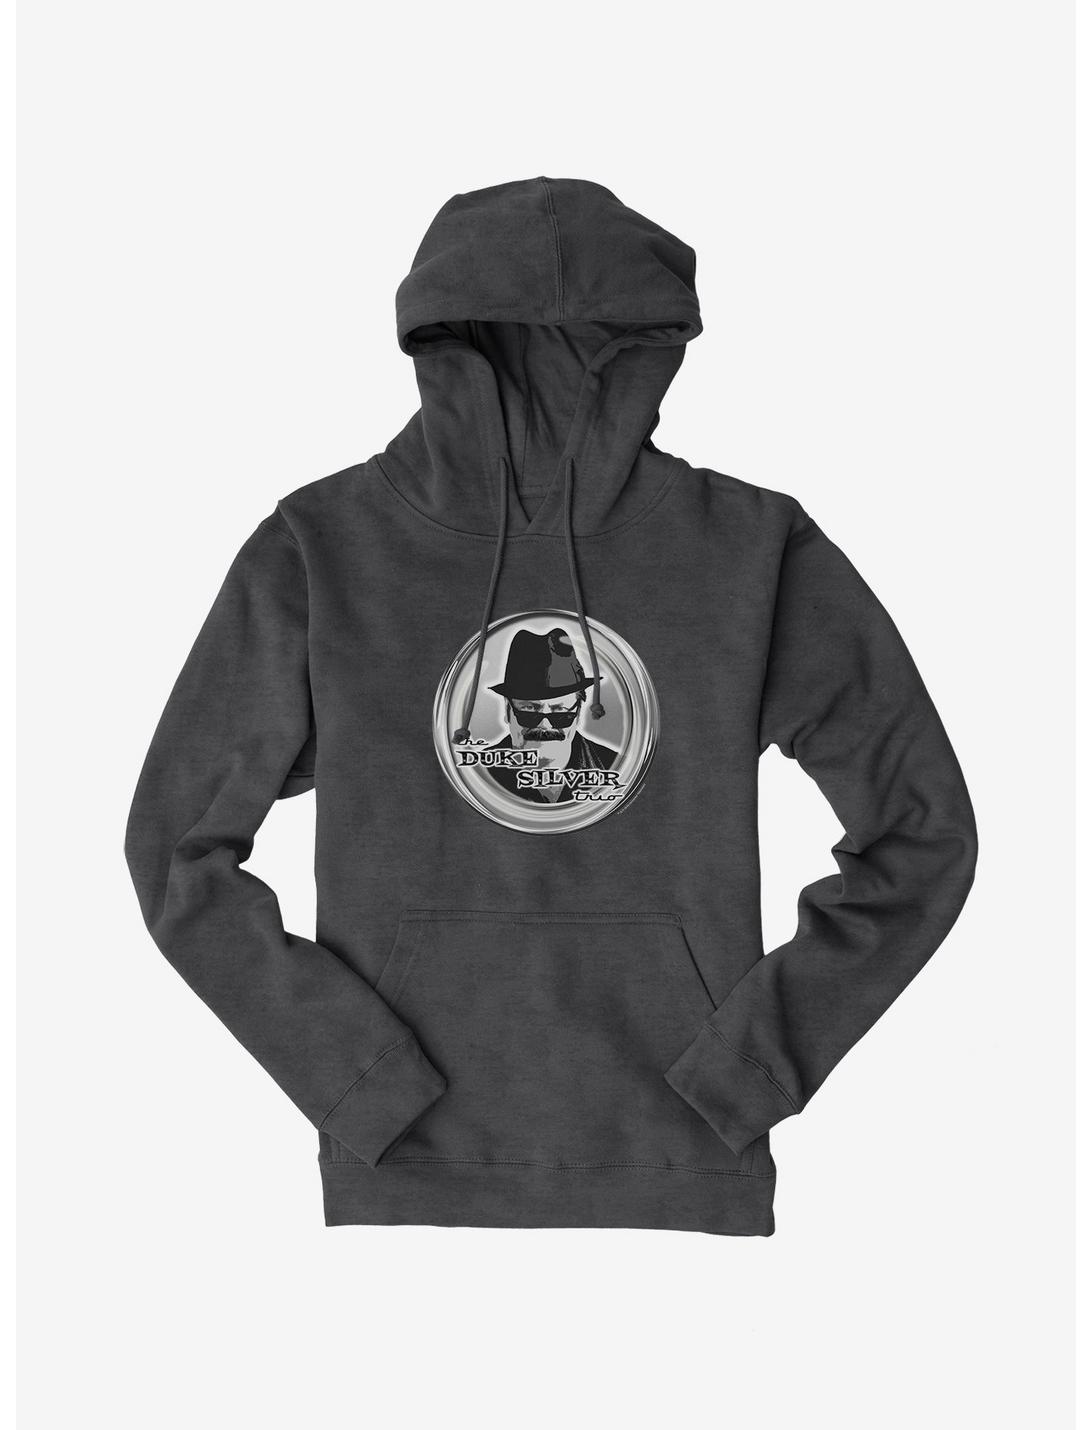 Parks And Recreation The Duke Silver Trio Hoodie, CHARCOAL HEATHER, hi-res